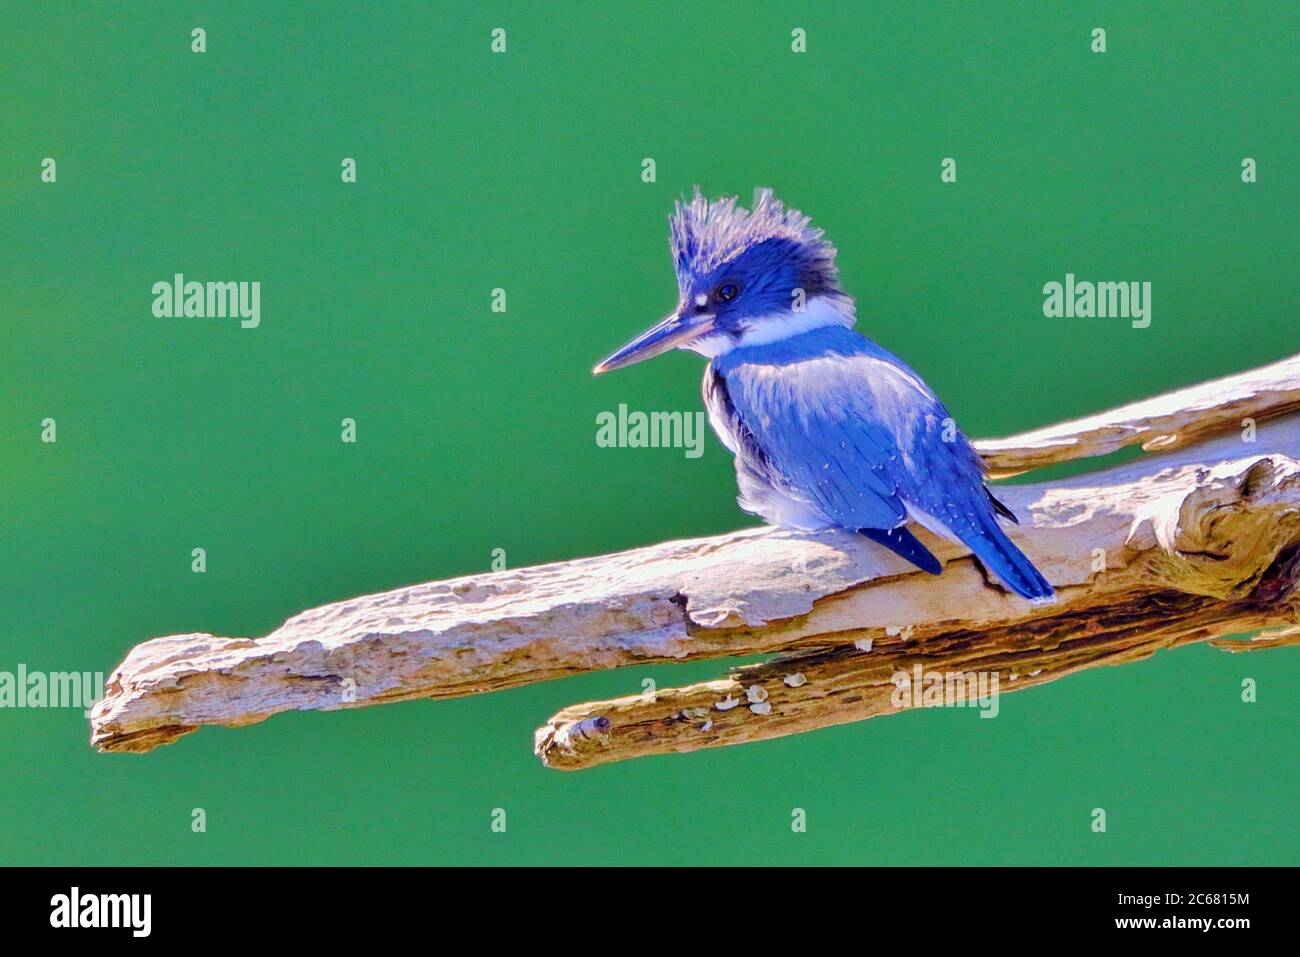 A Belted Kingfisher (Megaceryle alcyon) perched on a branch overlooking emerald green water near Campbell River, Vancouver Island, Canada. Stock Photo